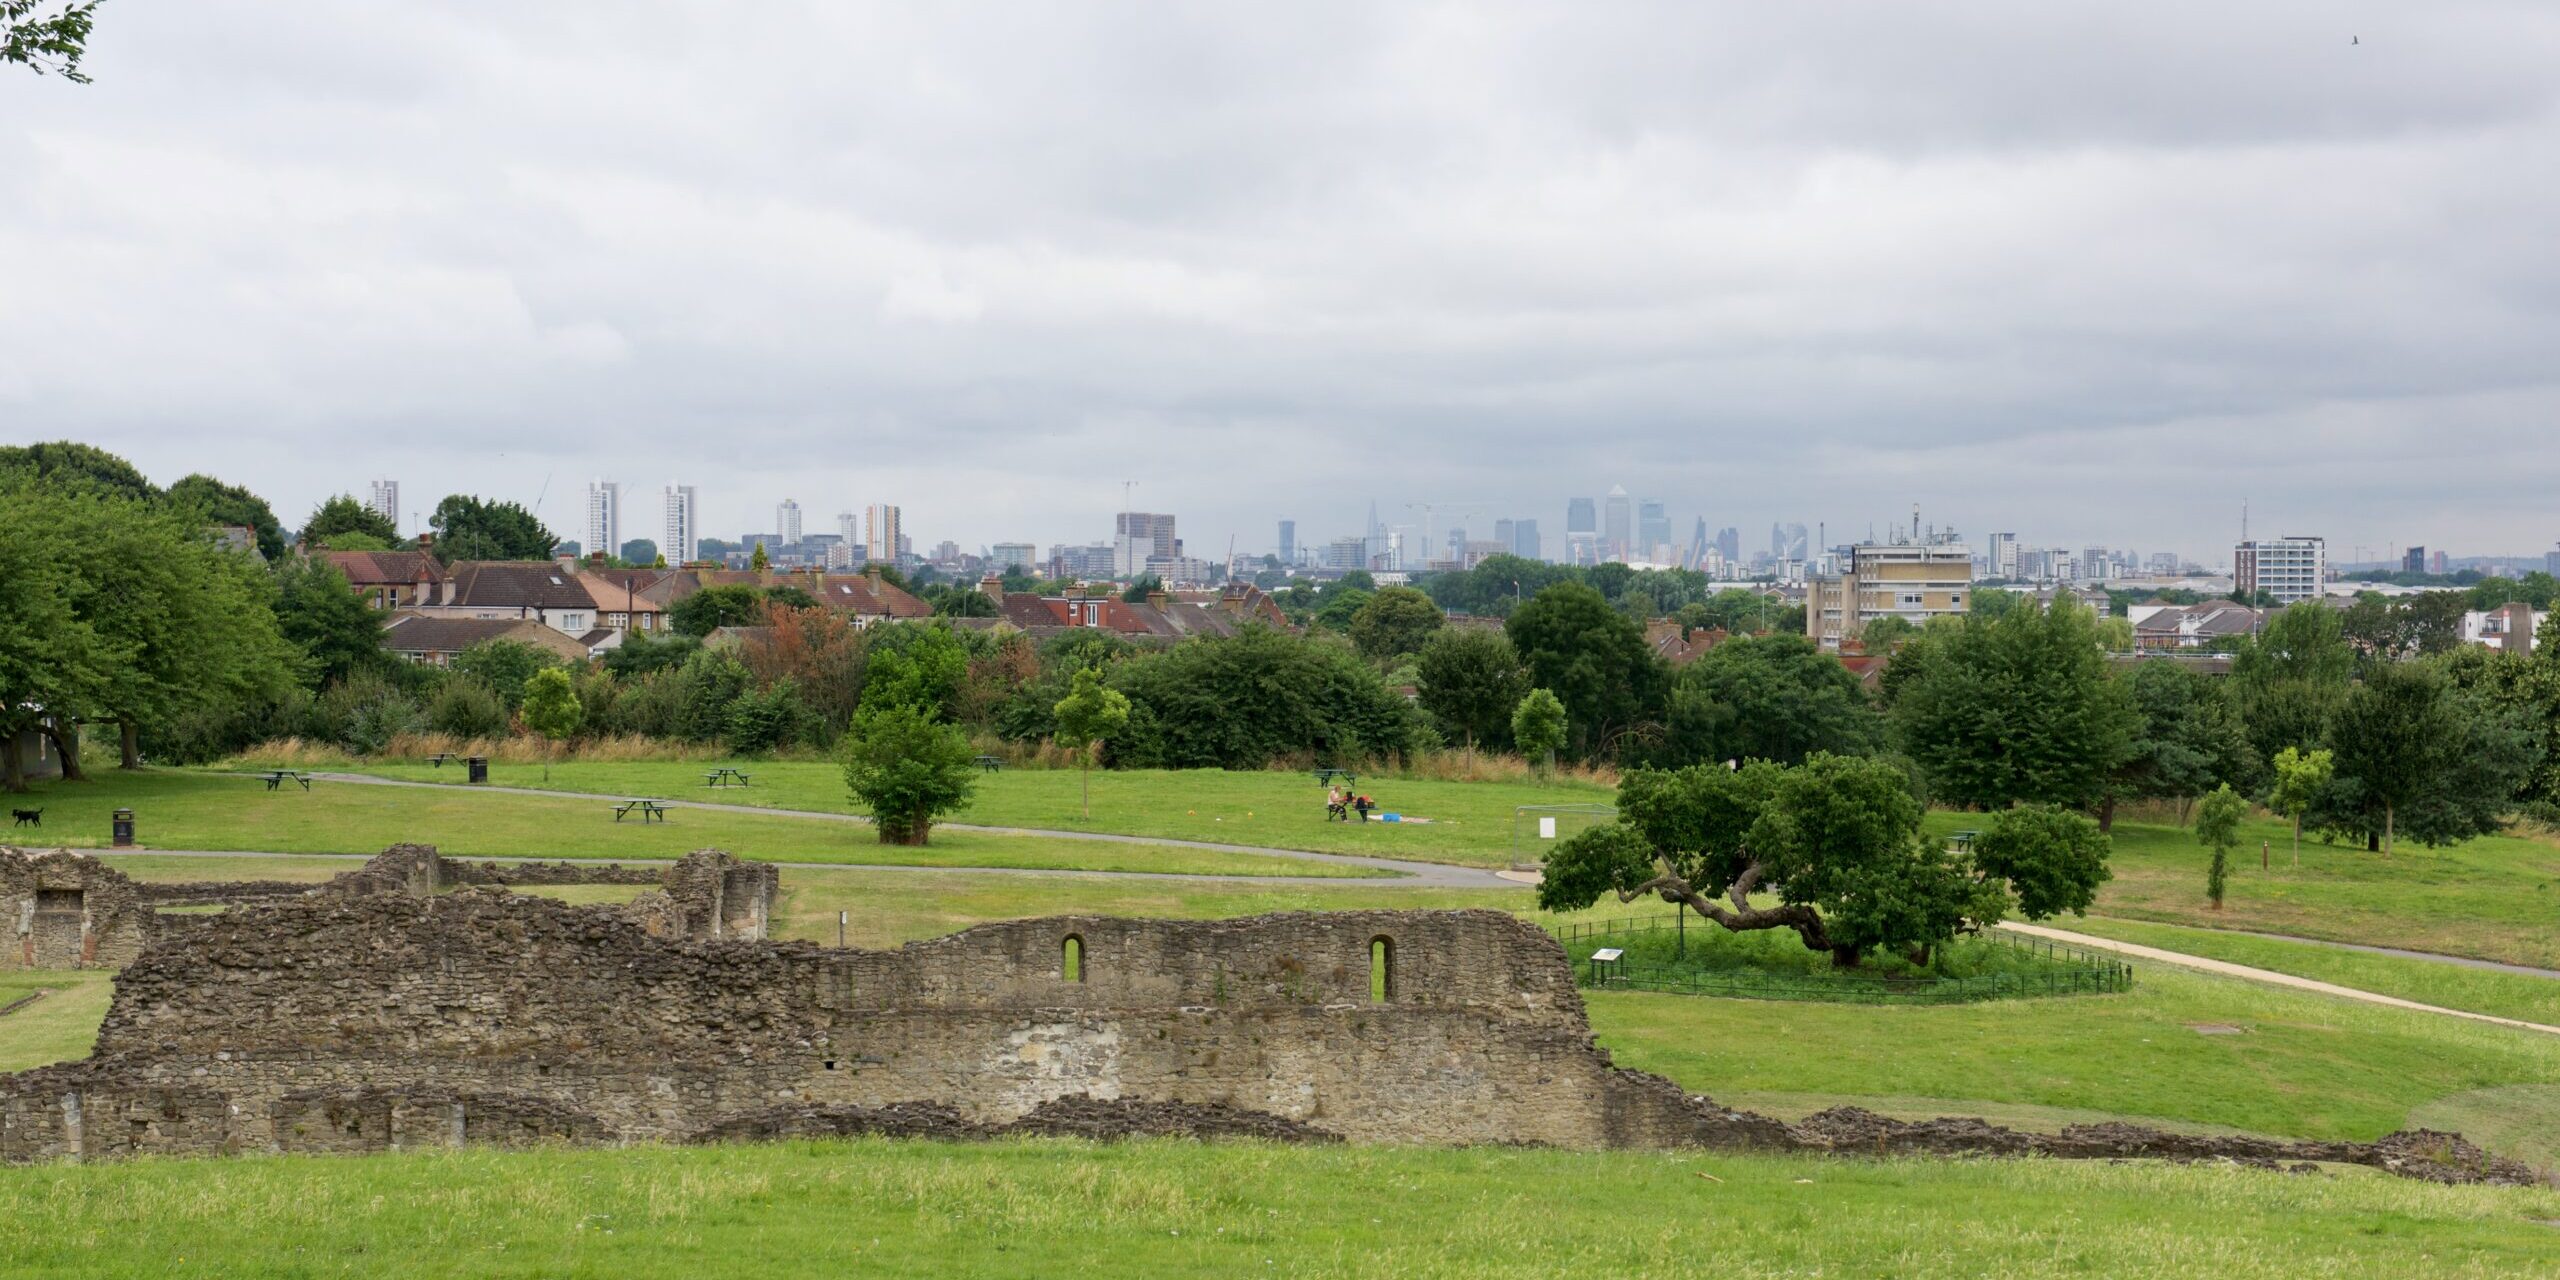 Lesnes ruins and city of London